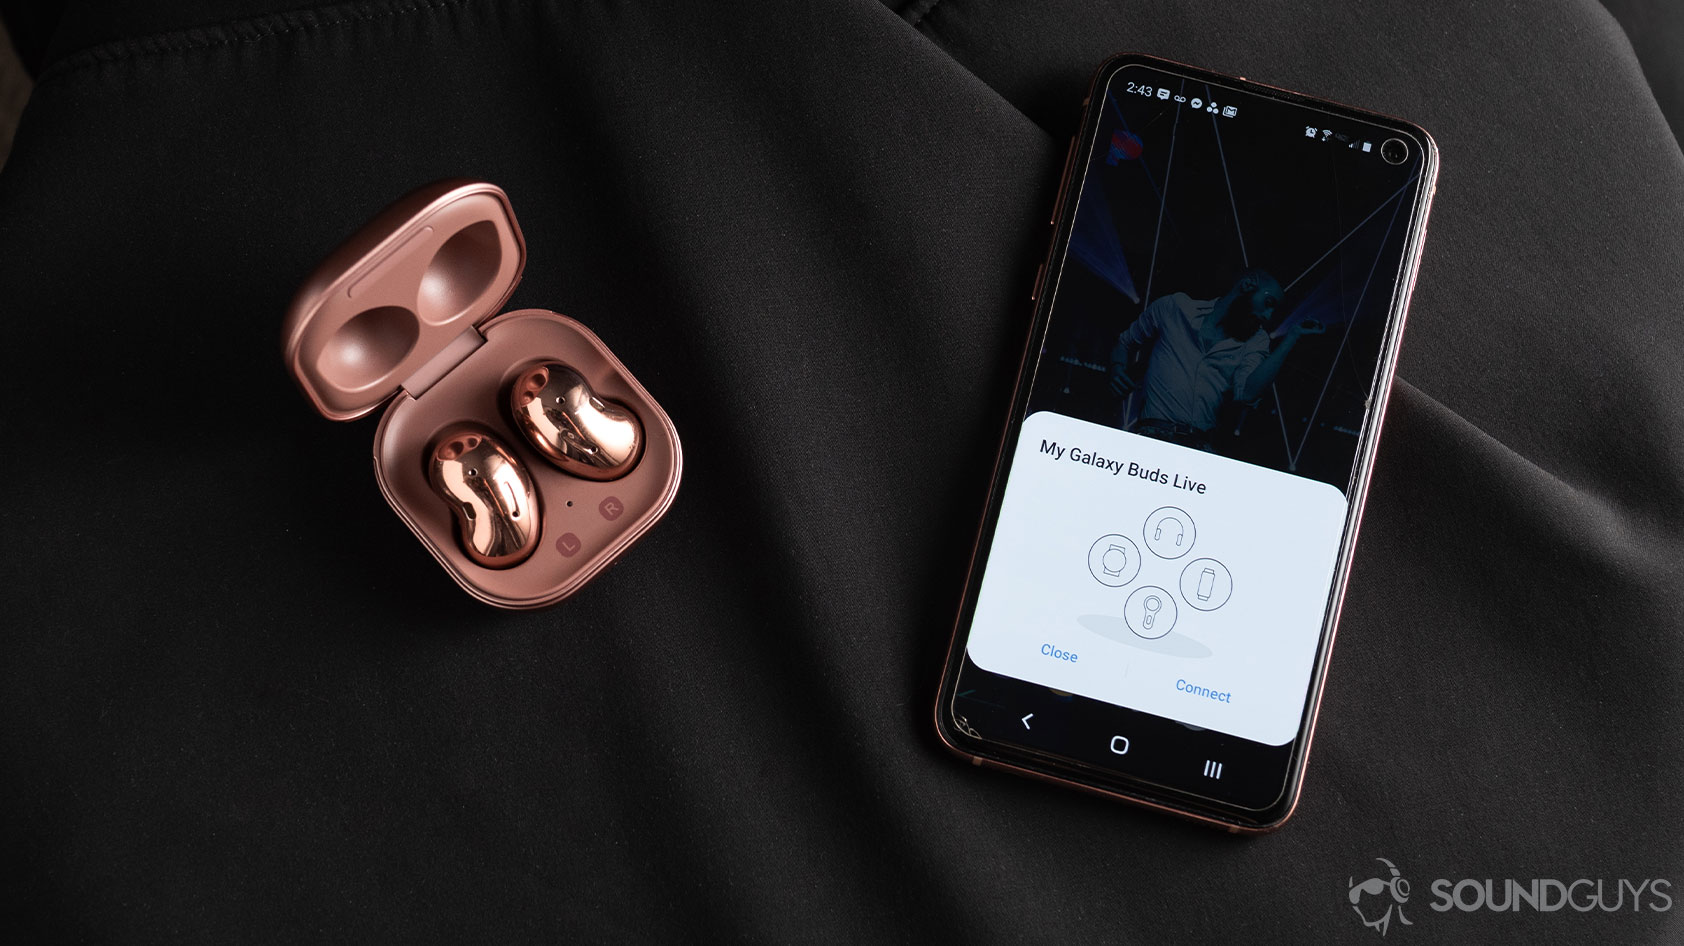 A picture of the Samsung Galaxy Buds Live noise canceling true wireless earbuds in the open case next to a Samsung Galaxy S10e smartphone with quick pairing for a comparison in the Apple AirPods vs Samsung Galaxy Buds Live breakdown.